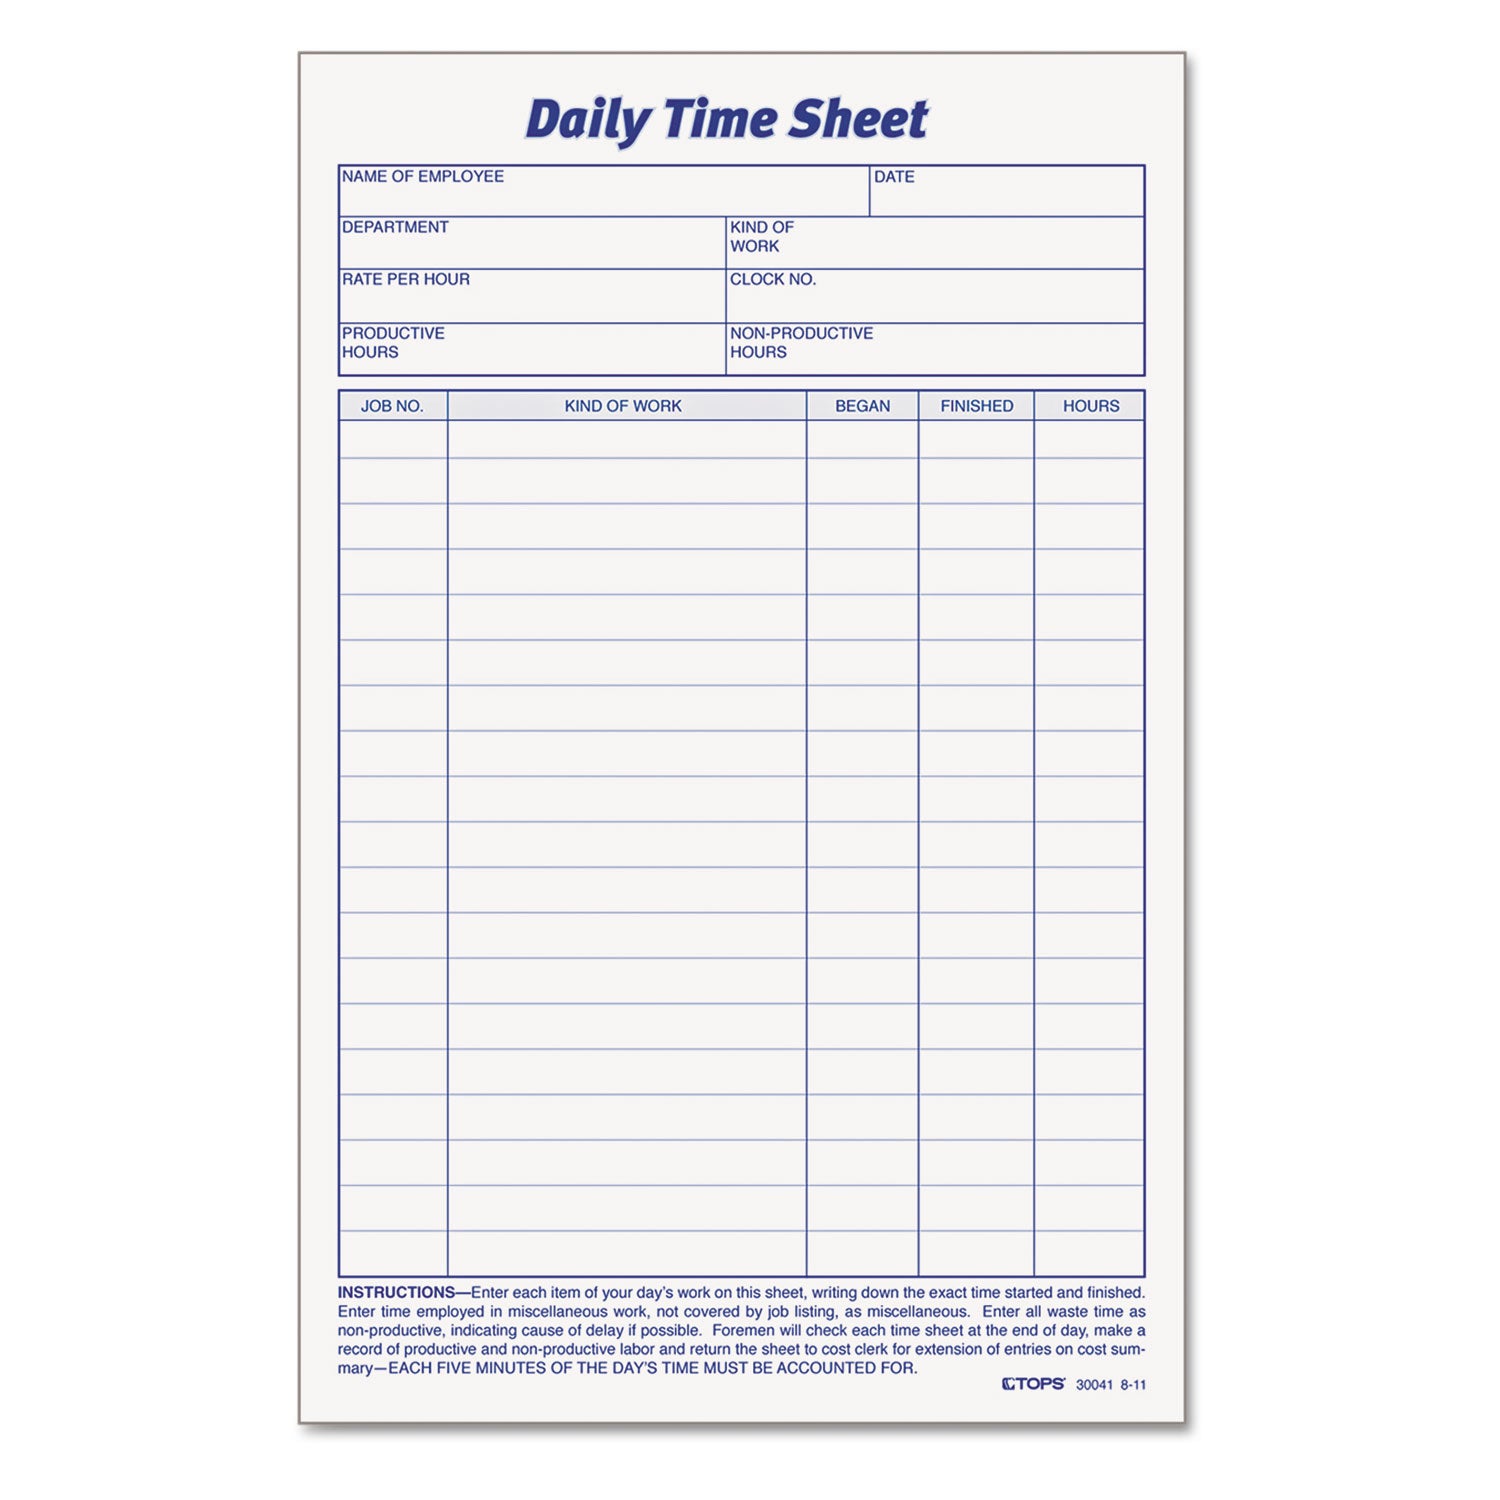 Daily Time and Job Sheets, One-Part (No Copies), 8.5 x 5.5, 200 Forms/Pad, 2 Pads/Pack - 